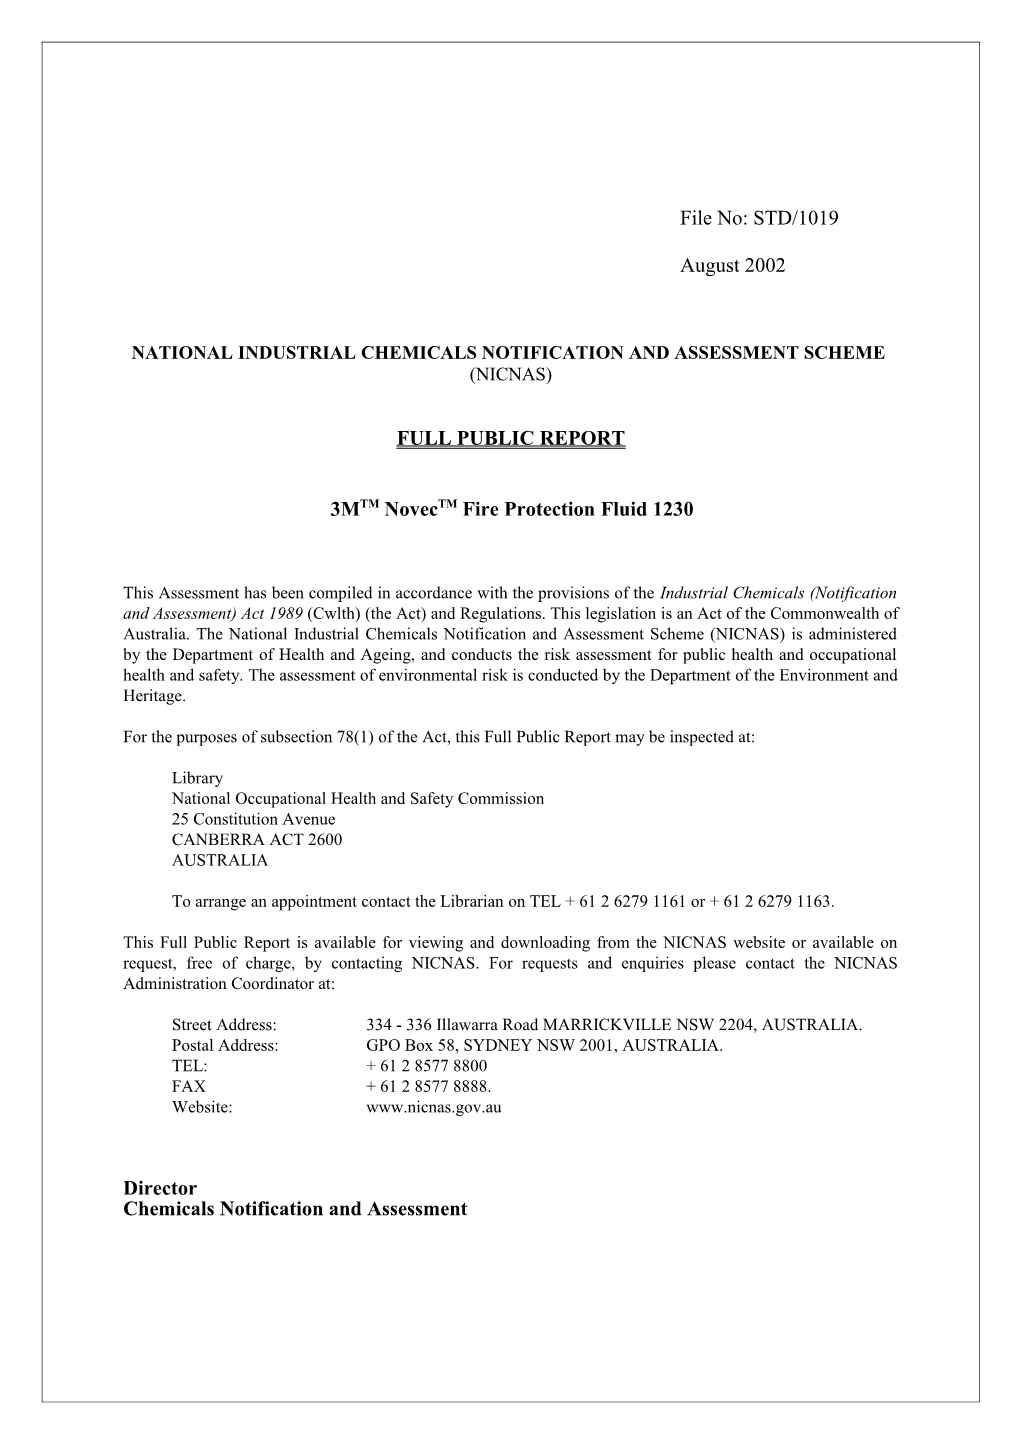 National Industrial Chemicals Notification and Assessment Scheme s42